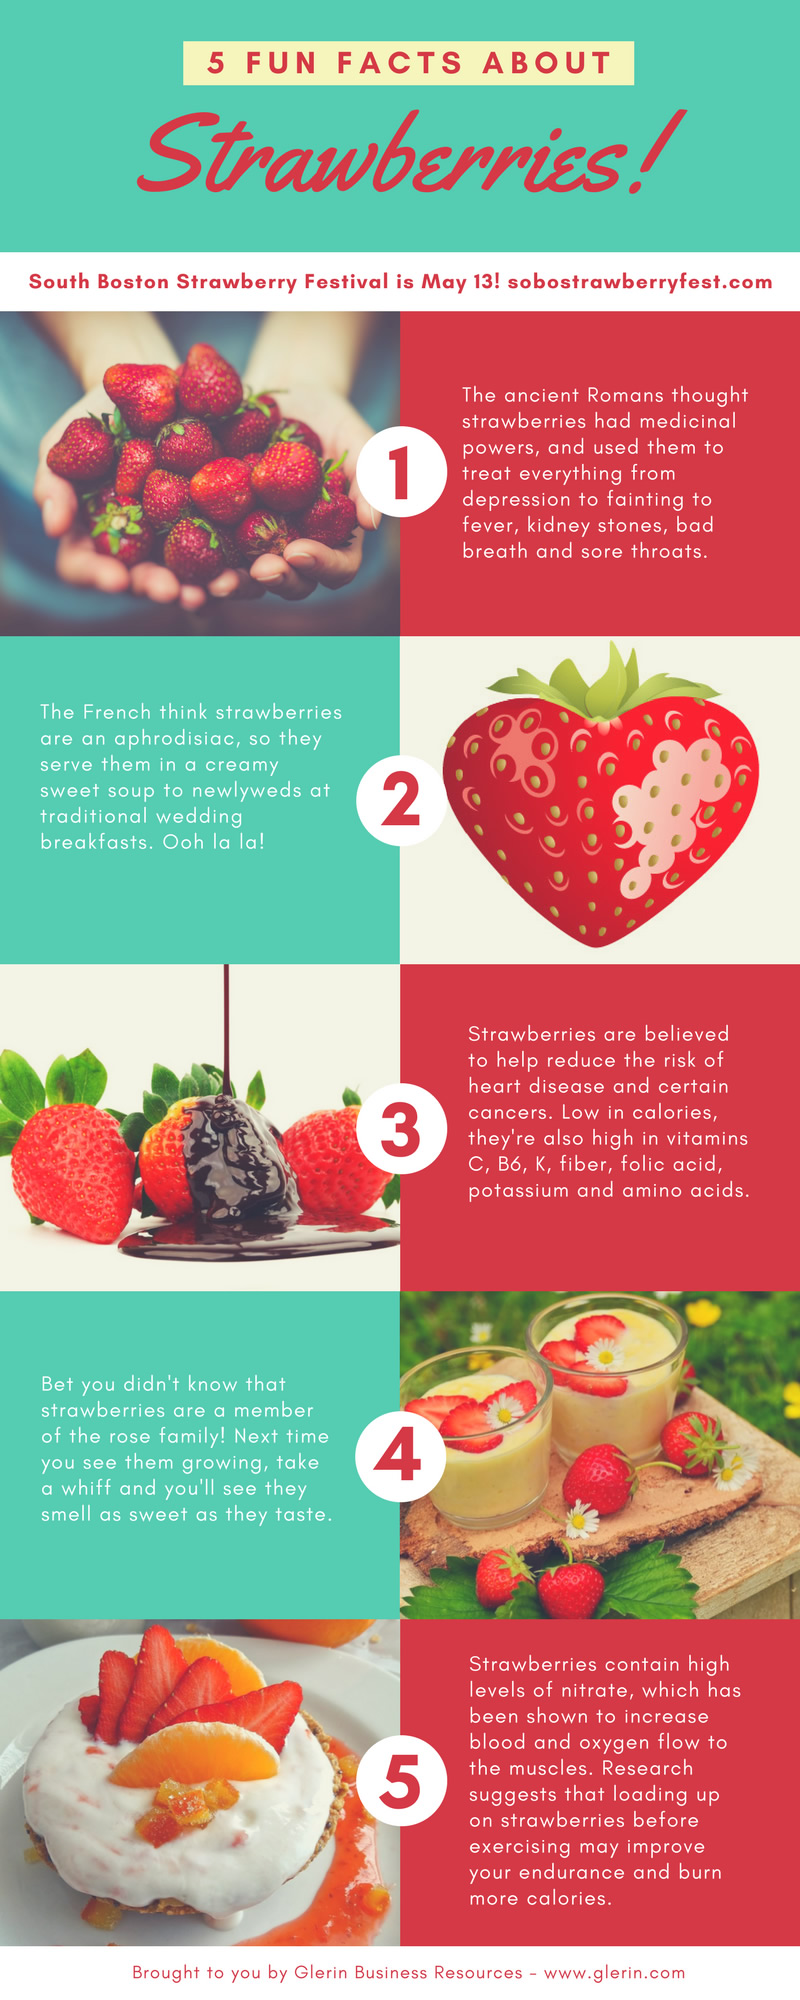 Fun Facts About Strawberries infographic